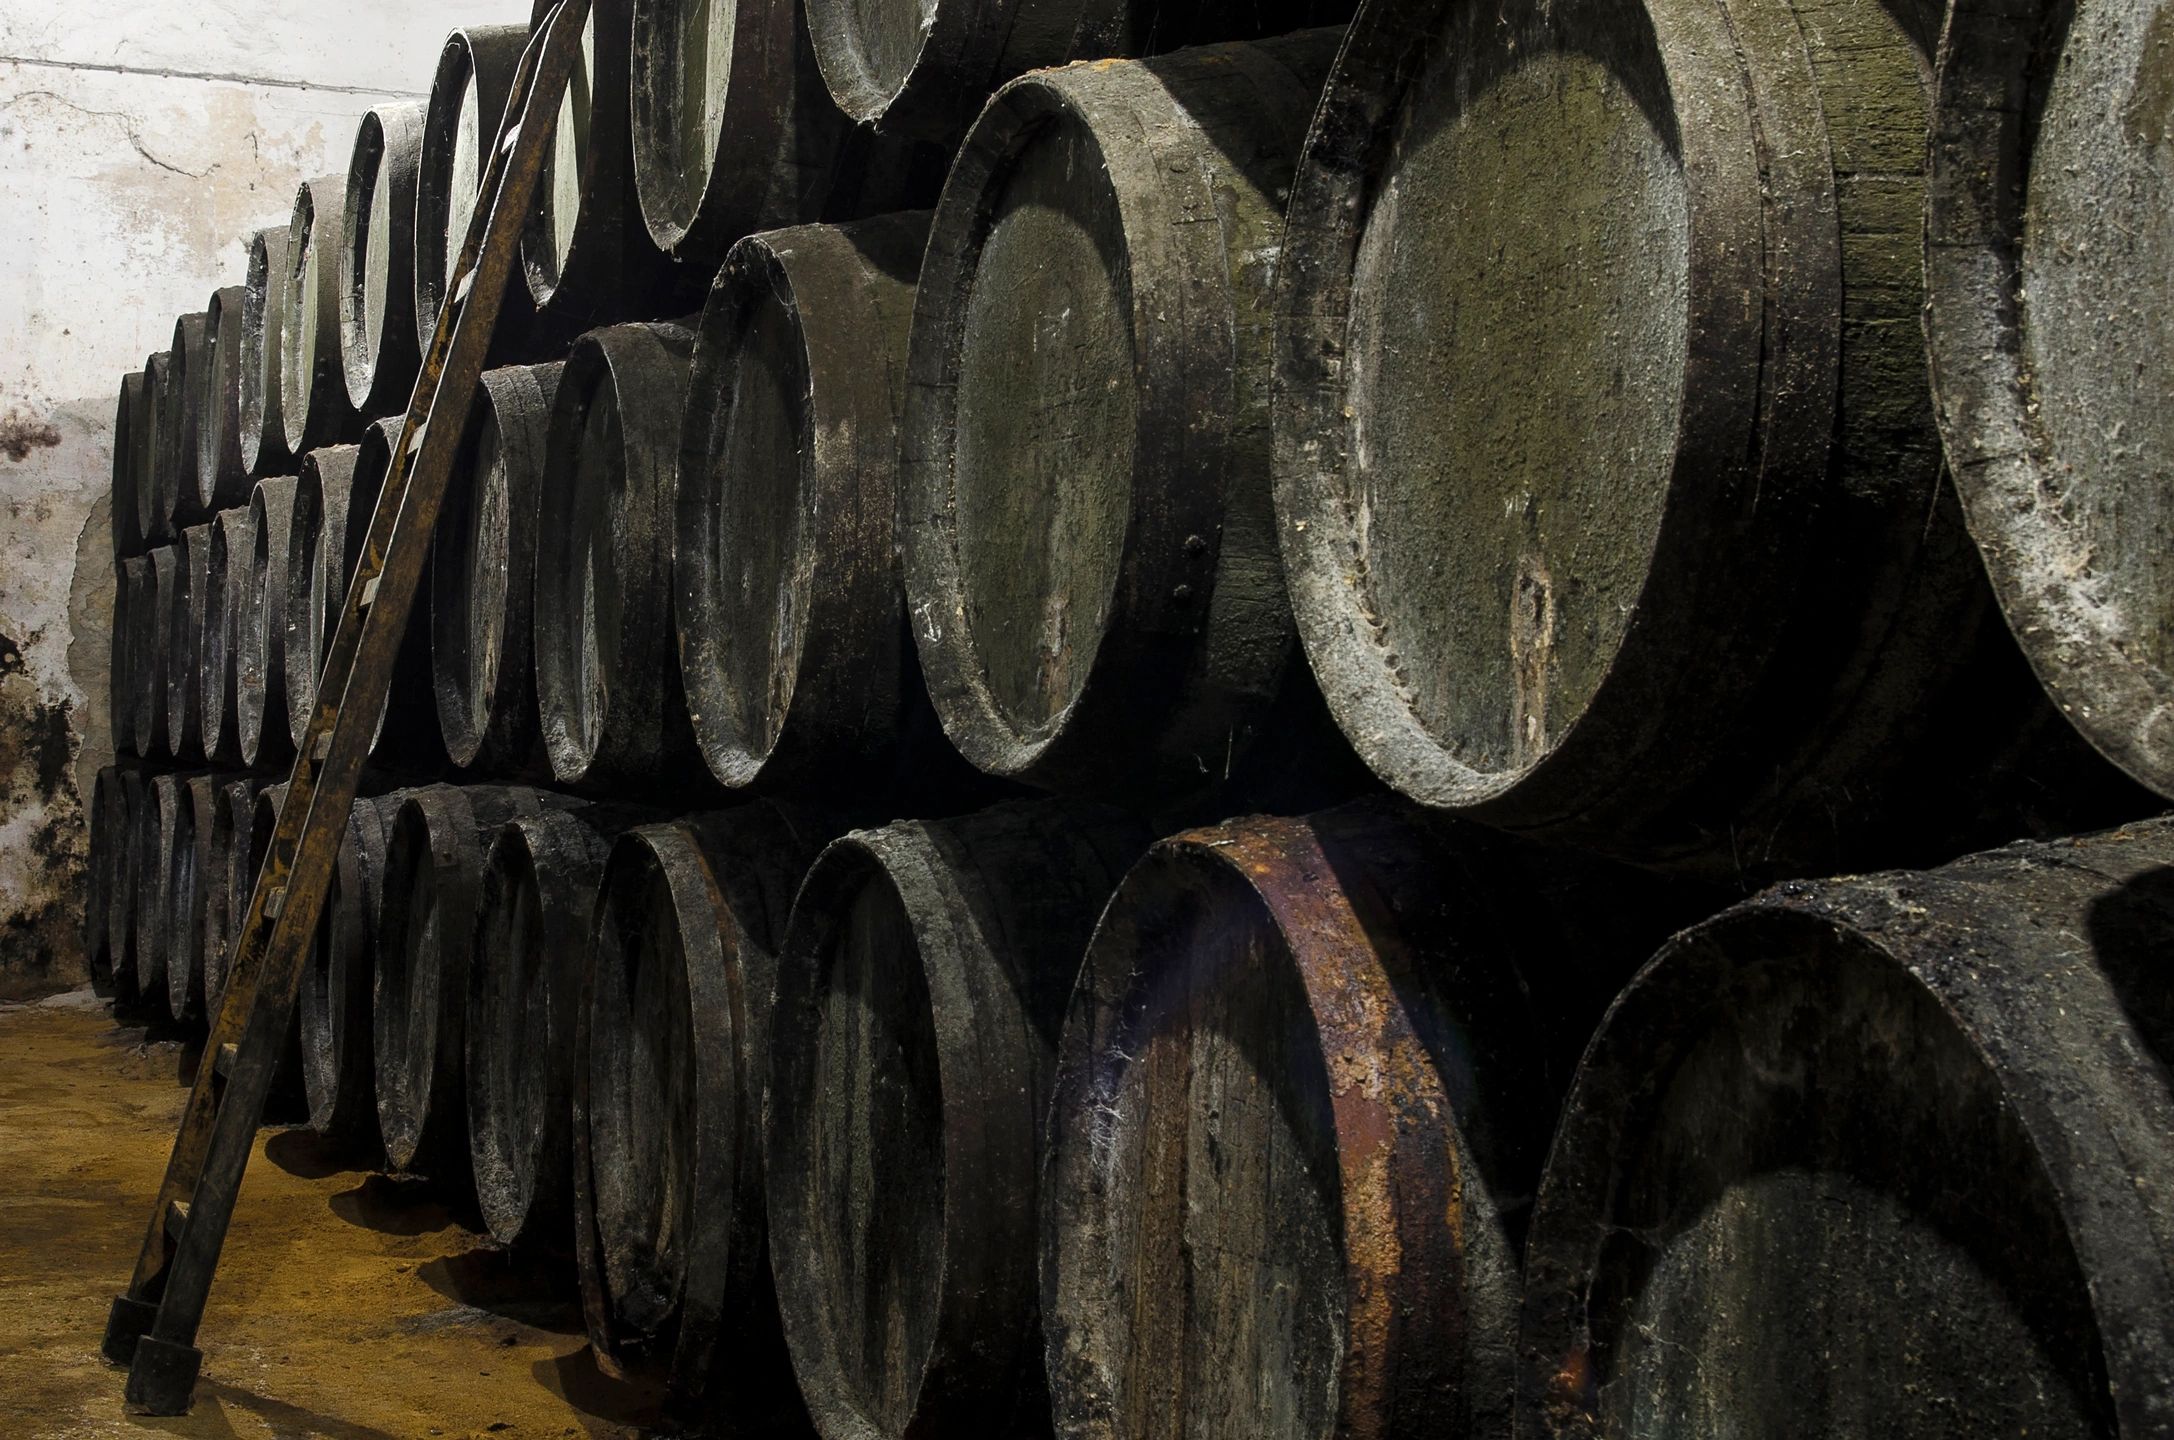 Whisky barrels show the history and journey the scotch and whisky have taken,